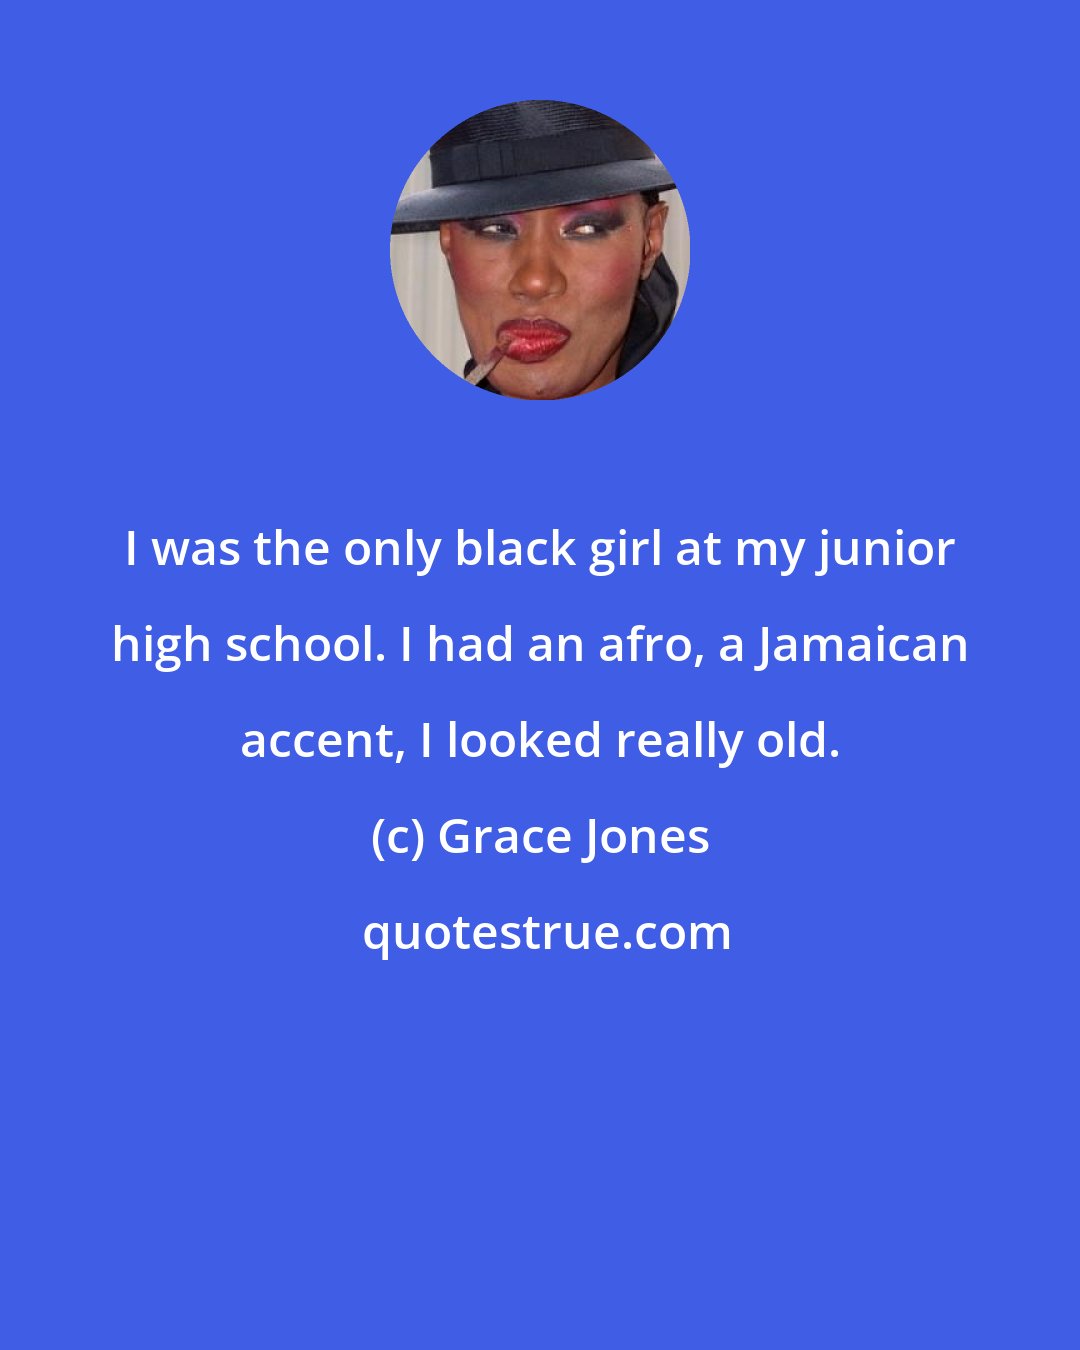 Grace Jones: I was the only black girl at my junior high school. I had an afro, a Jamaican accent, I looked really old.